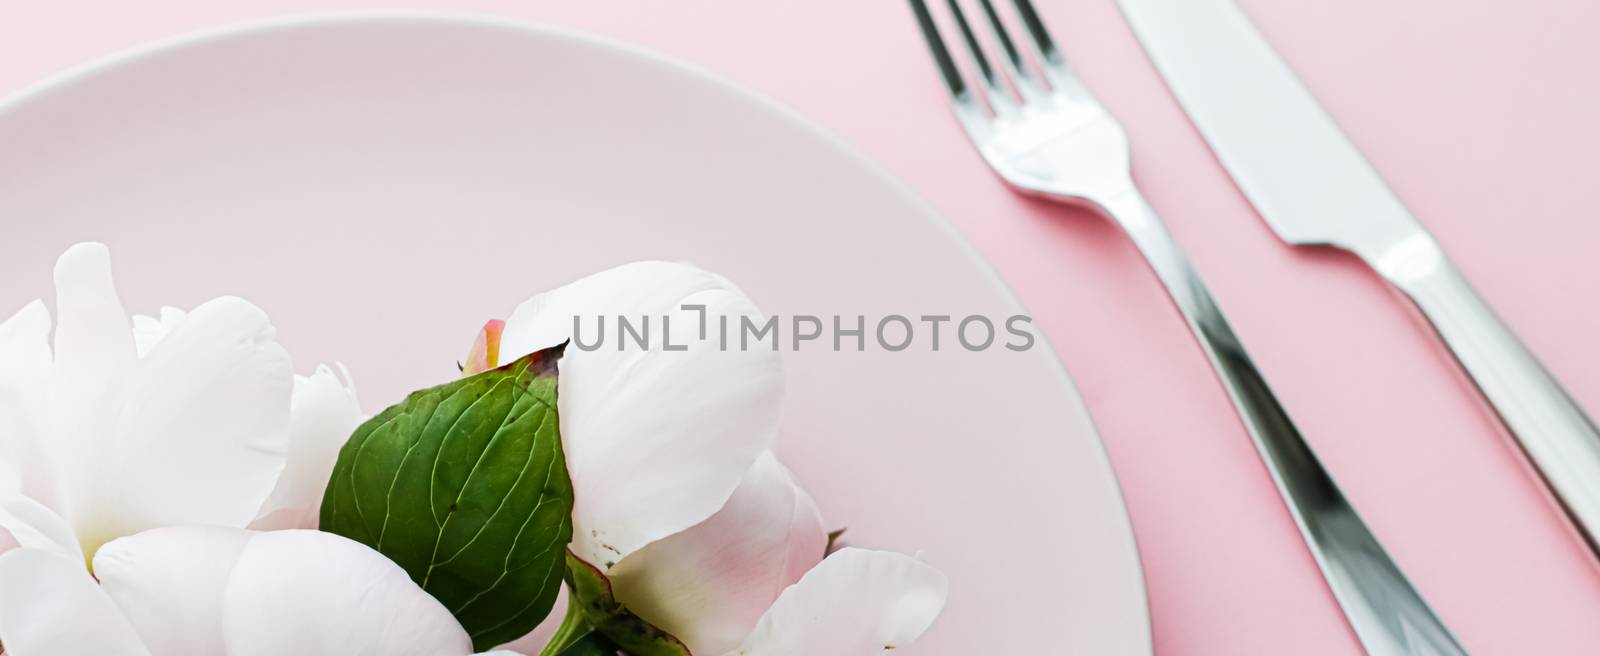 Dining plate and cutlery with peony flowers as wedding decor set on pink background, top tableware for event decoration and menu branding design